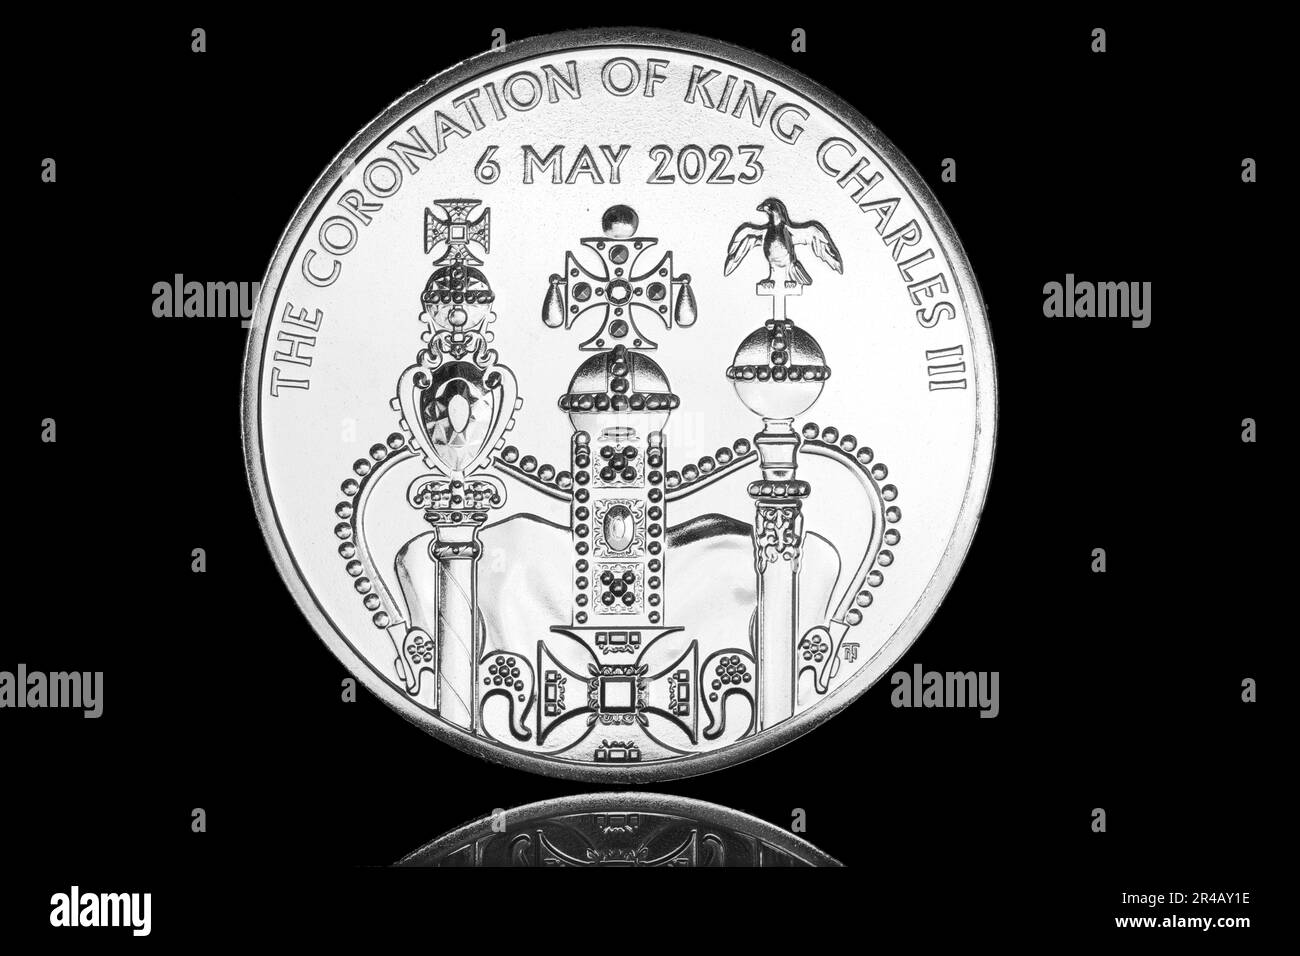 Reverse side of a 2023 £5 coin to commemorate the Coronation of King Charles III at Westminster Abbey on 6th May 2023 Stock Photo